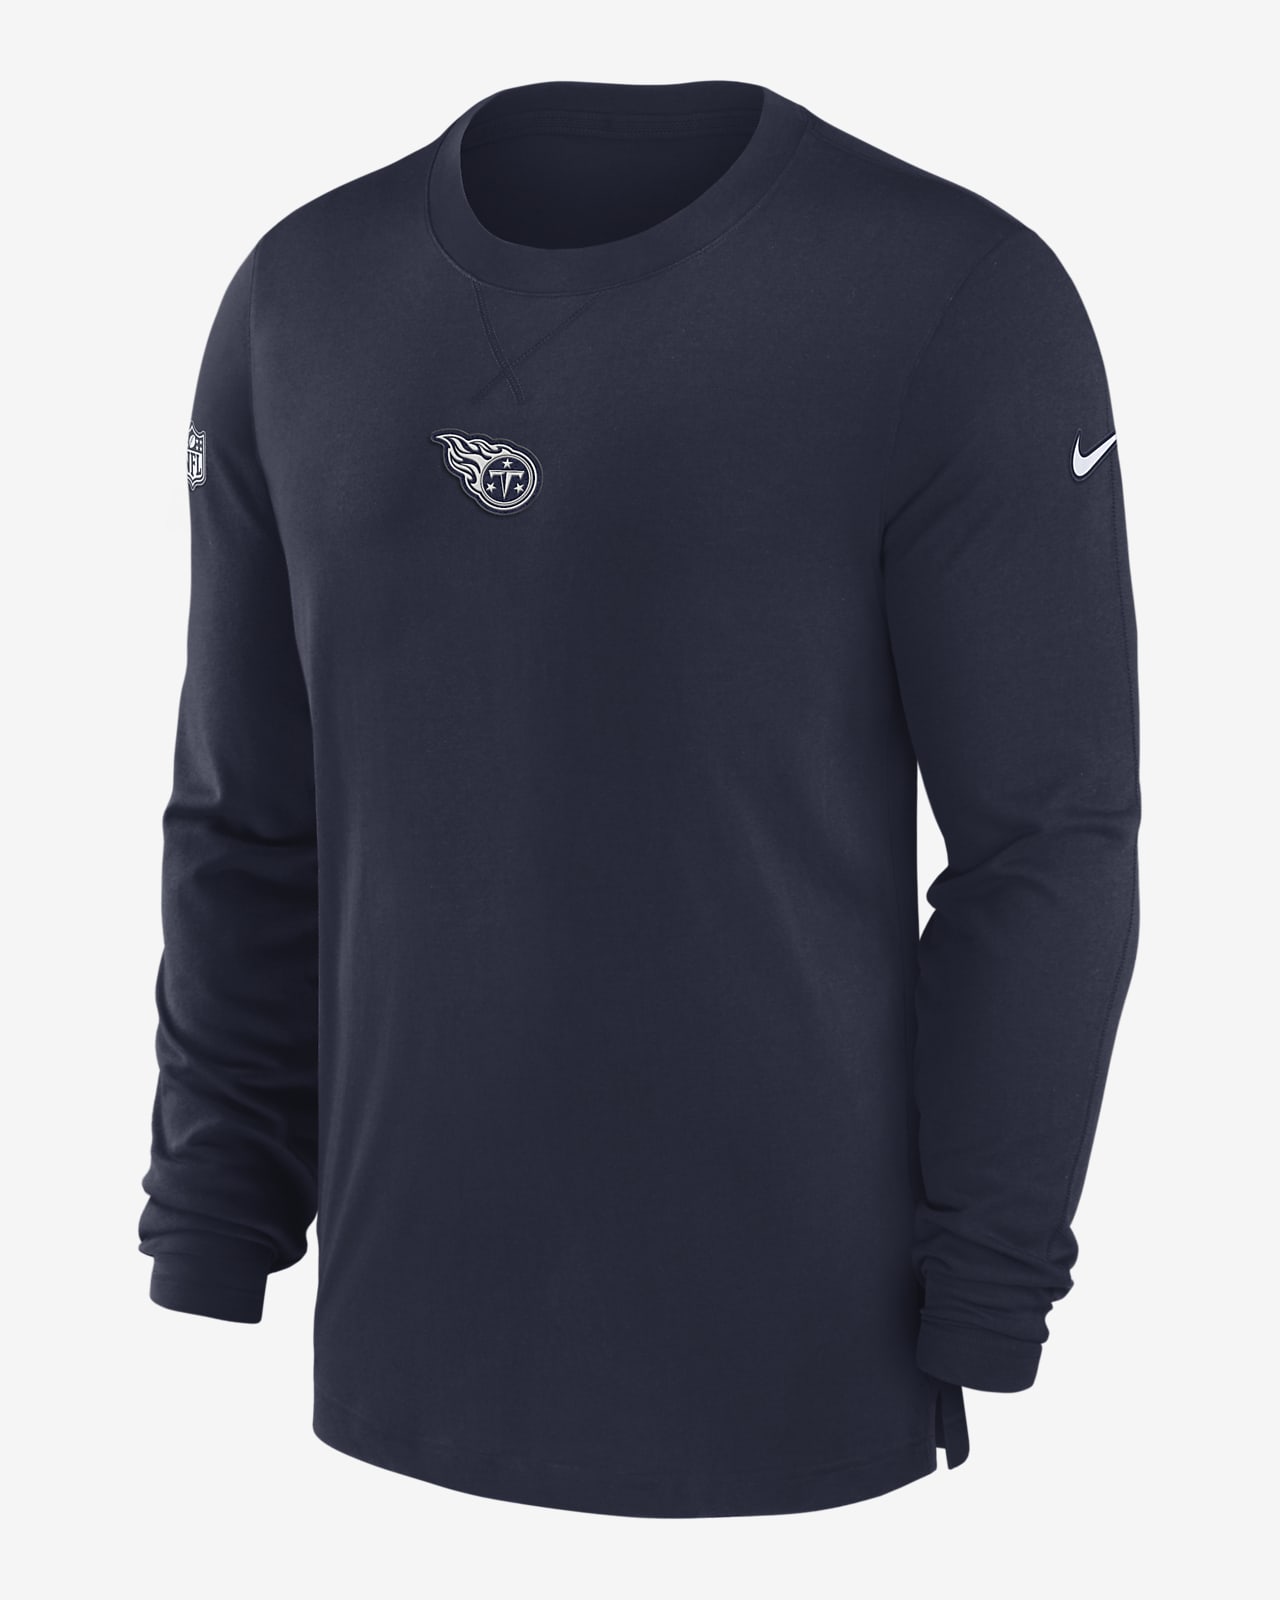 Tennessee Titans Sideline Men’s Nike Dri-FIT NFL Long-Sleeve Top